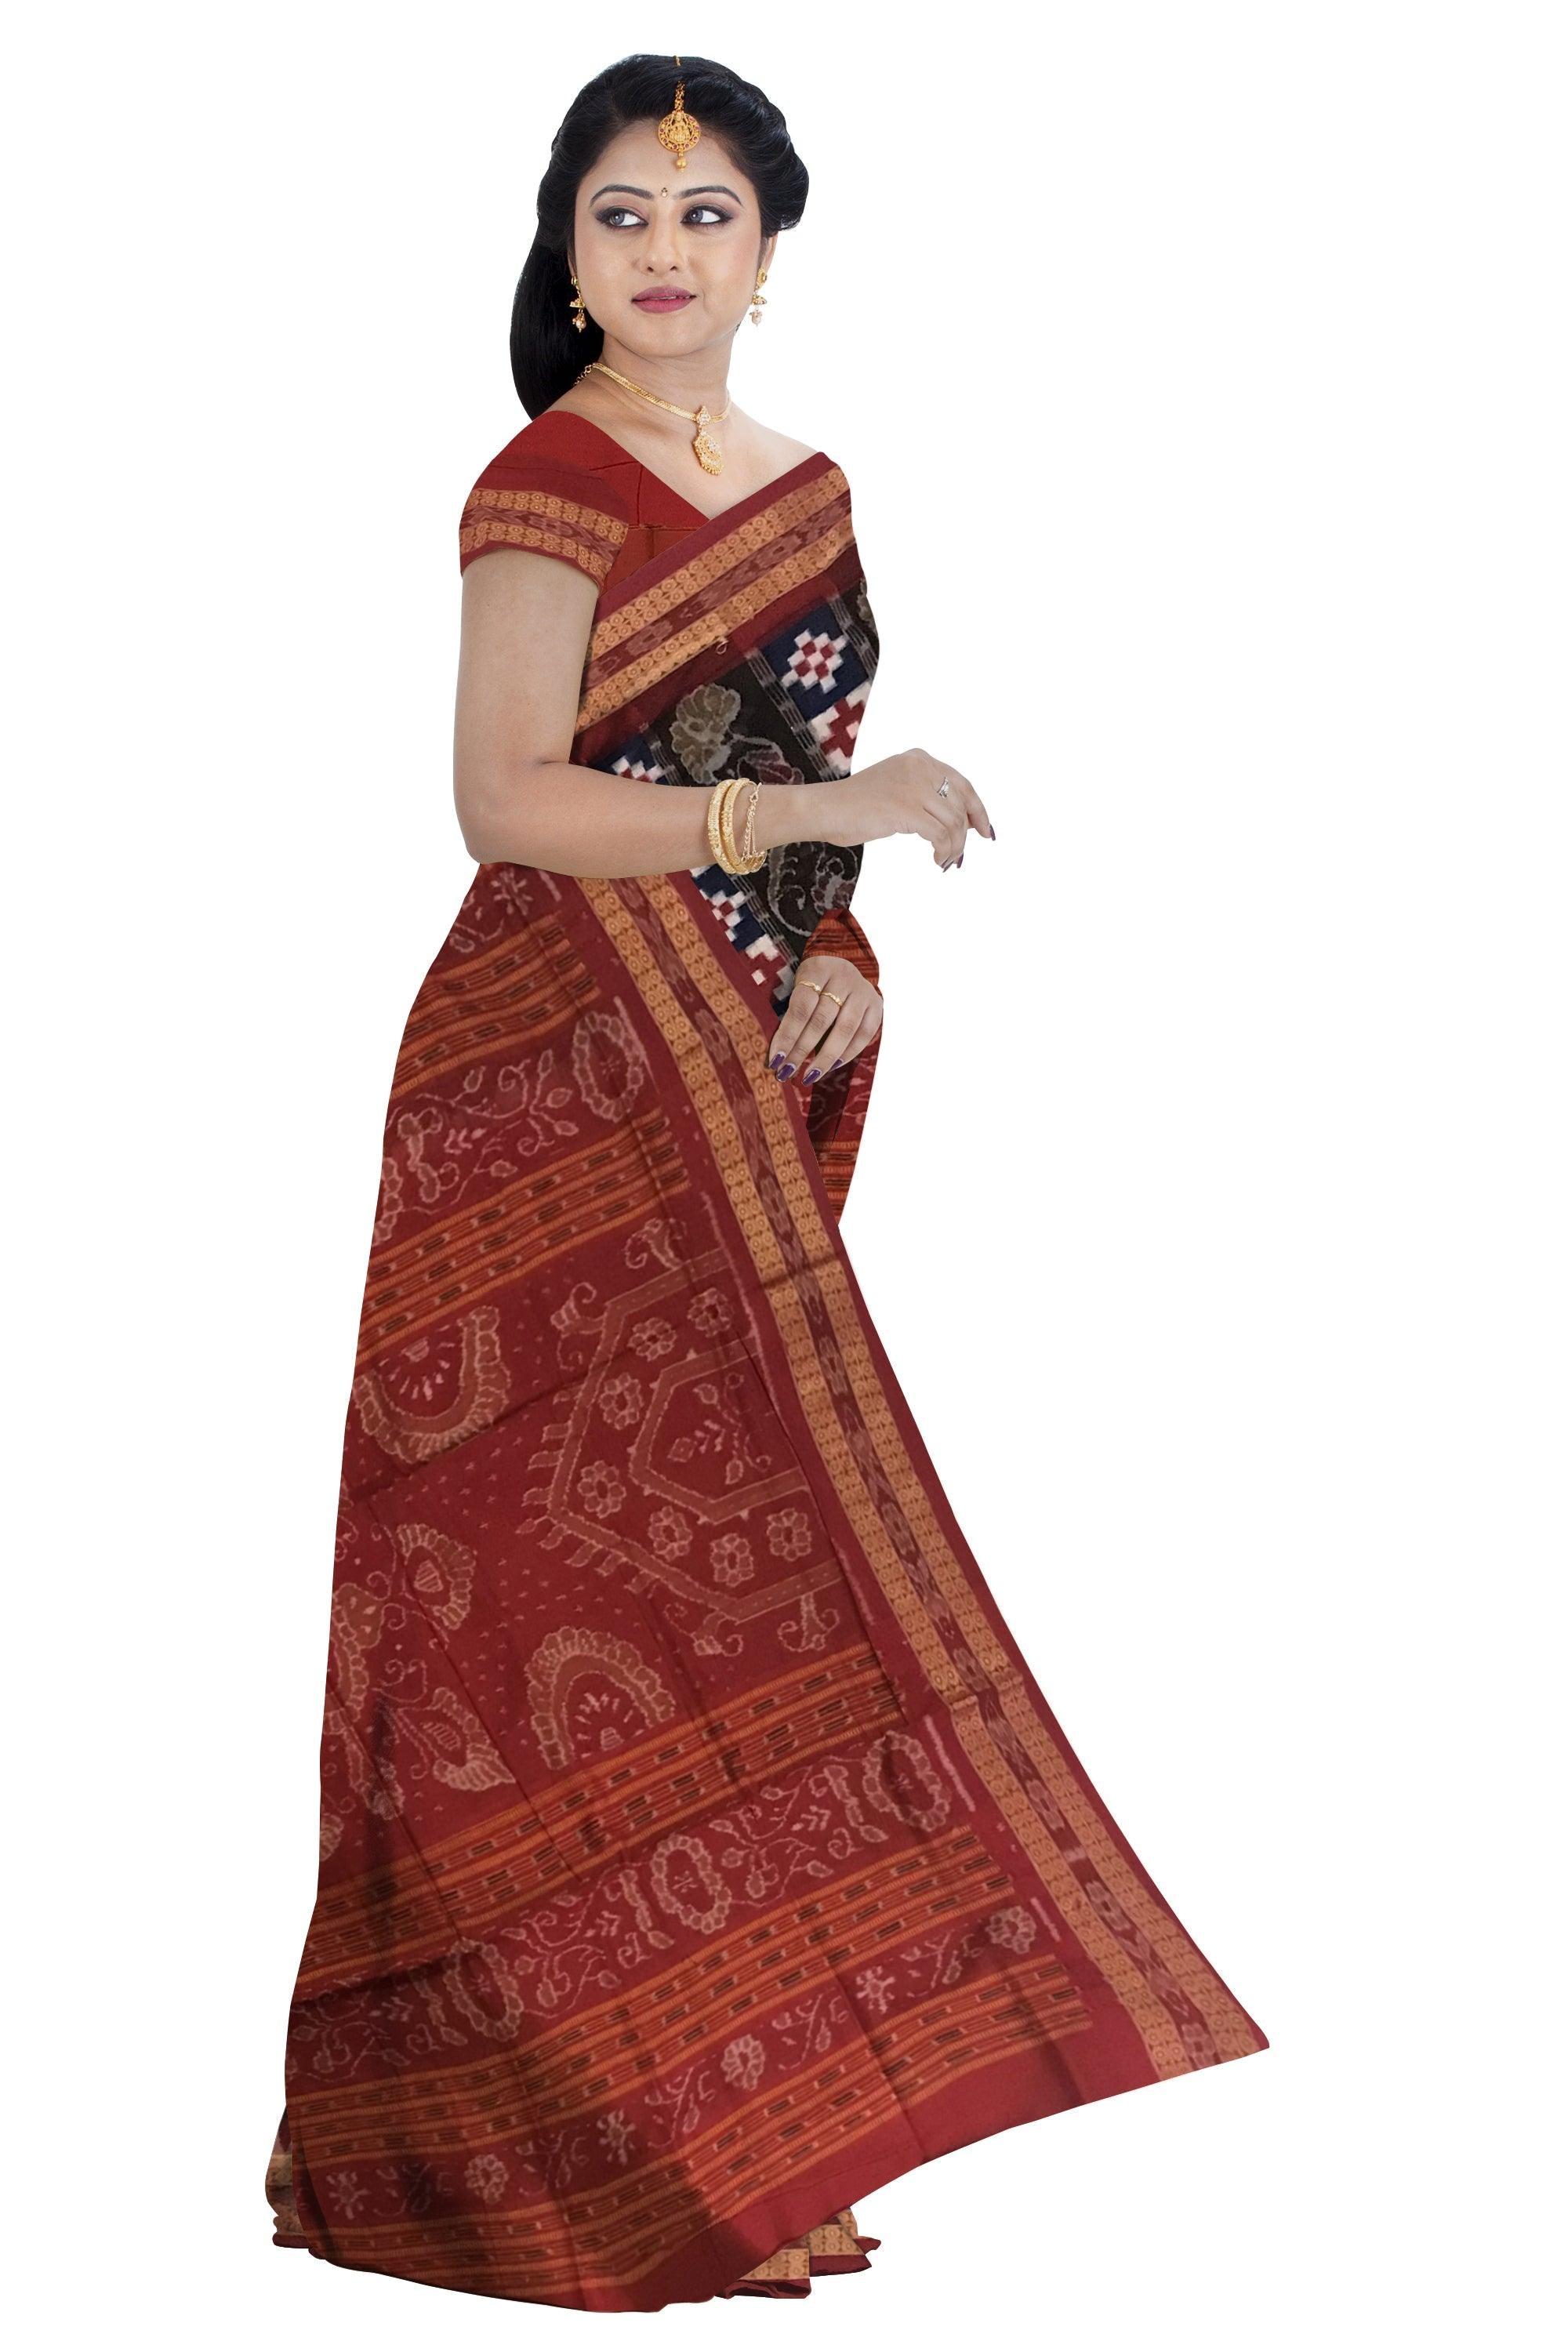 SHANKHA WITH PASAPALI PATTERN COTTON SAREE IS BLACK COLOR BASE, ATTACHED WITH BLOUSE PIECE. - Koshali Arts & Crafts Enterprise